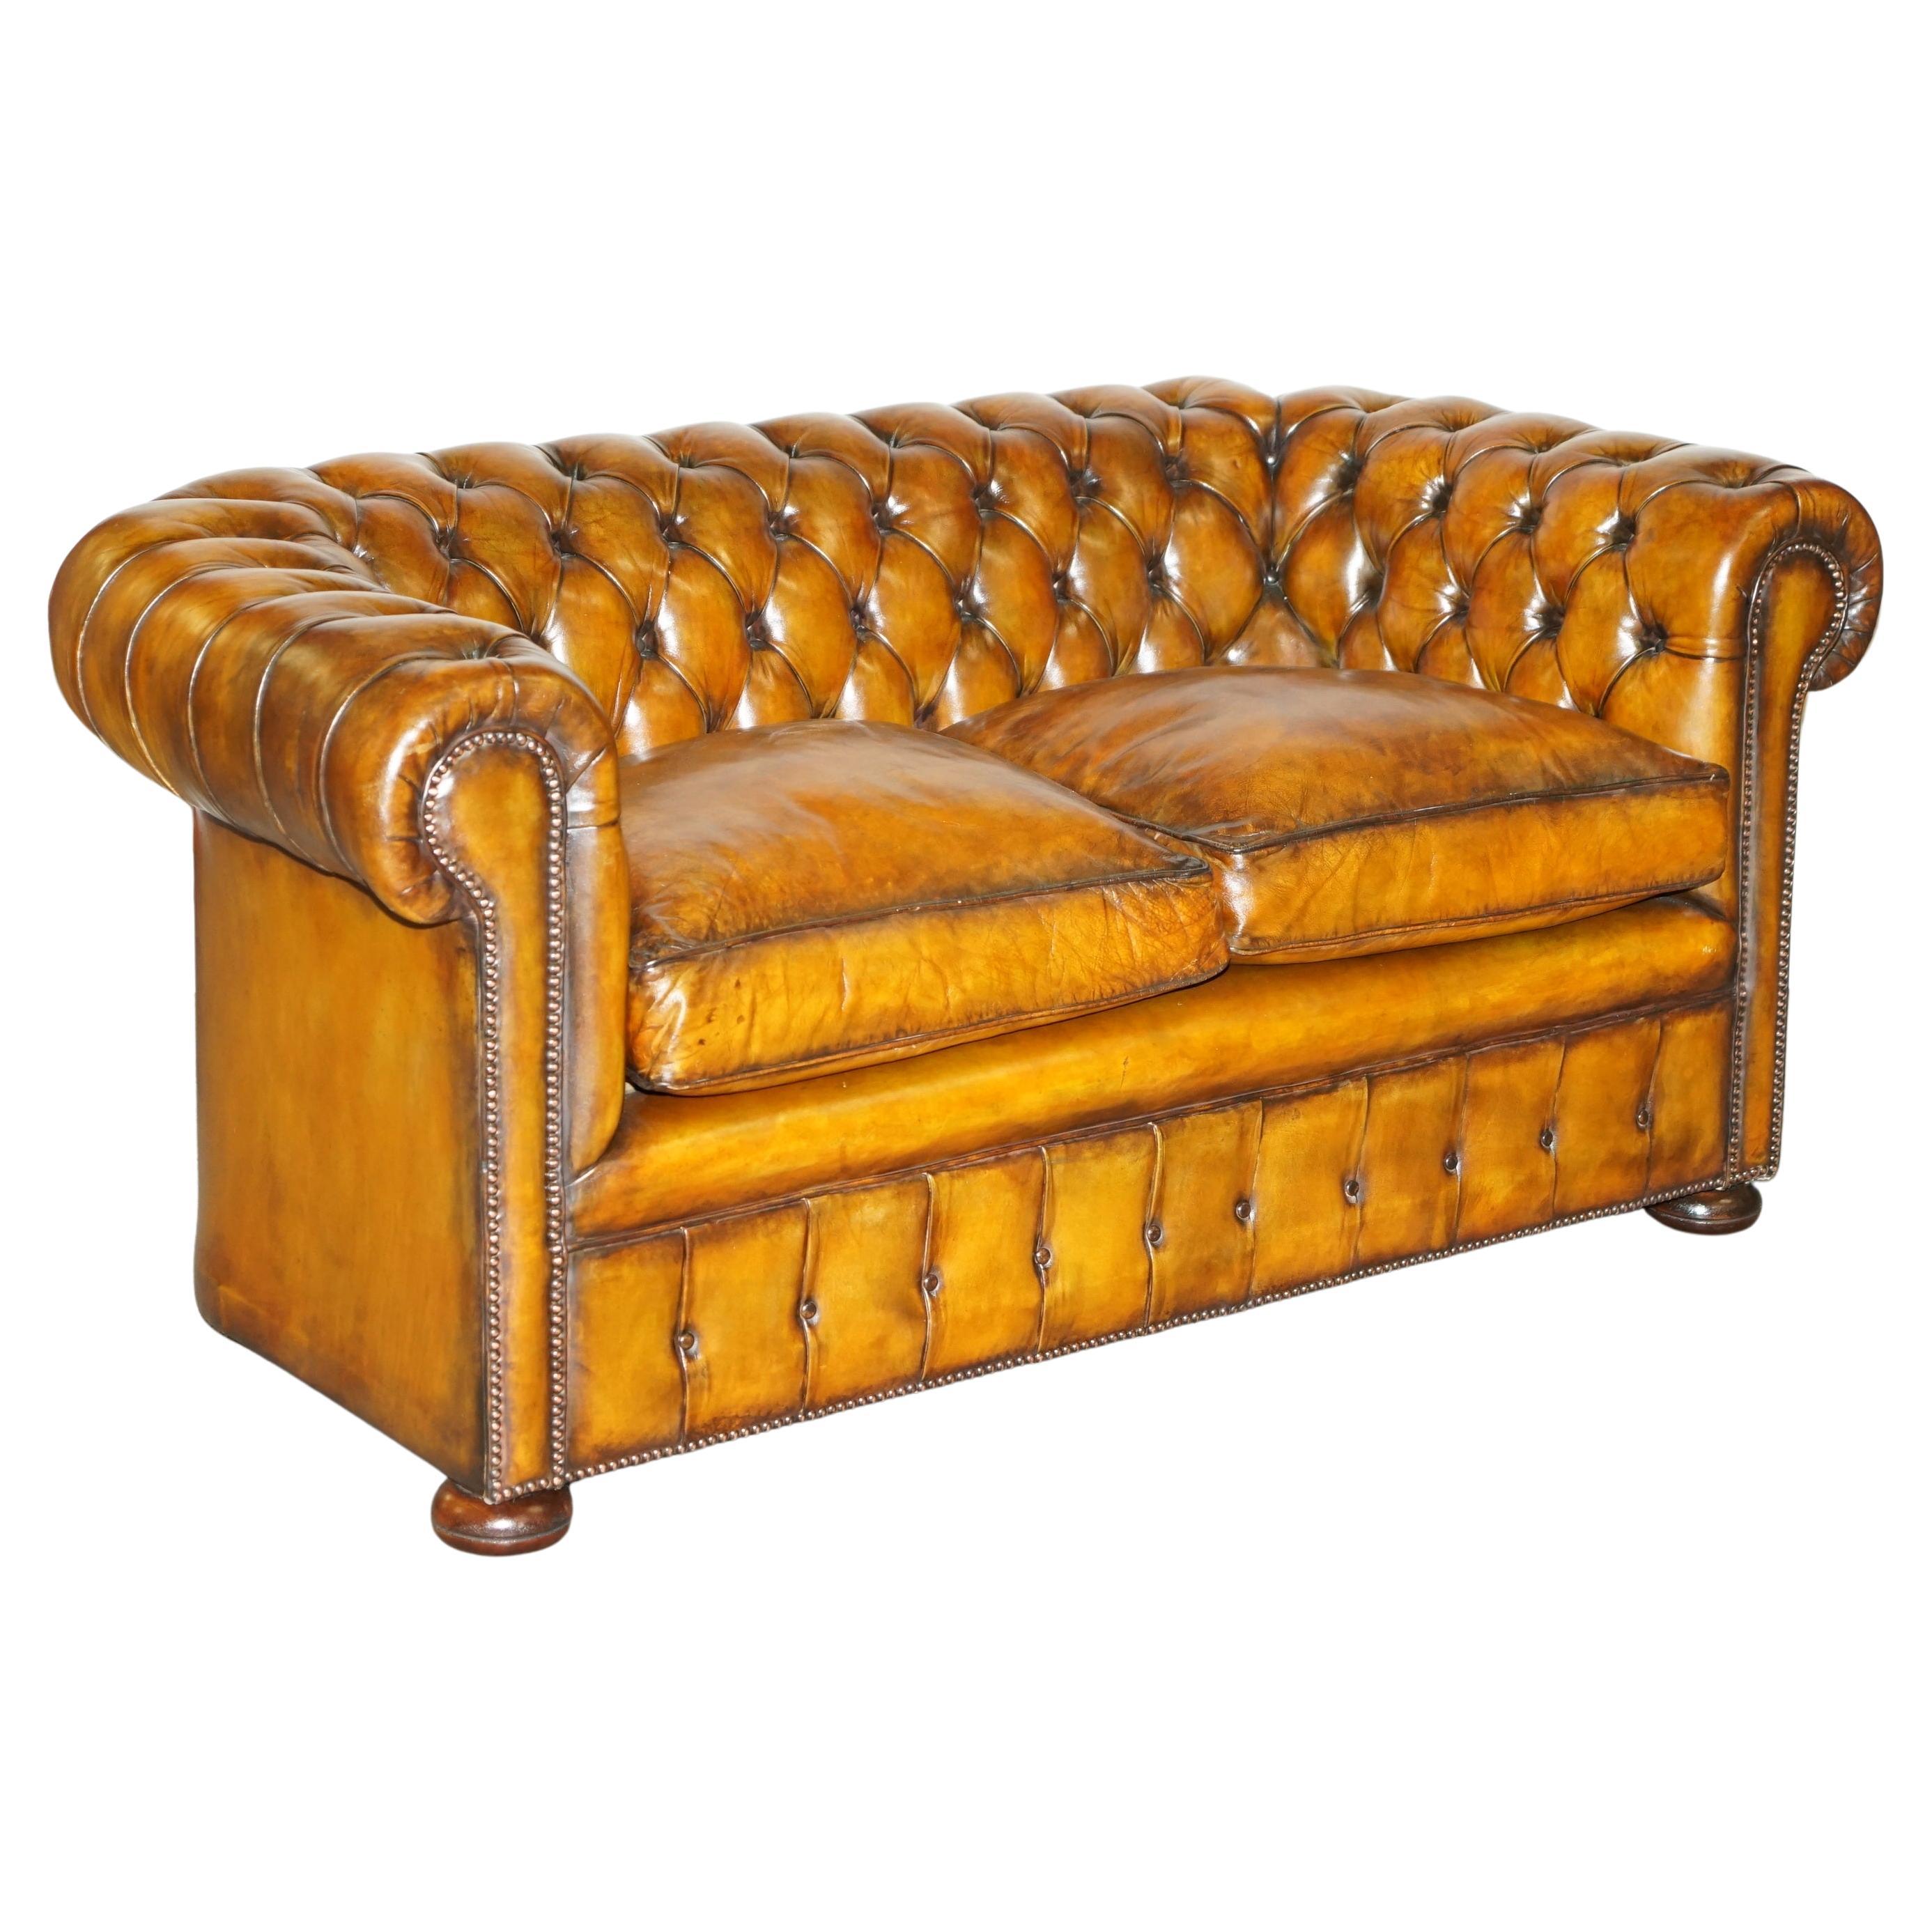 1940's ENGLISH HAND DYED RESTORED WHISKY BROWN LEATHER CHESTERFIELD CLUB SOFA For Sale